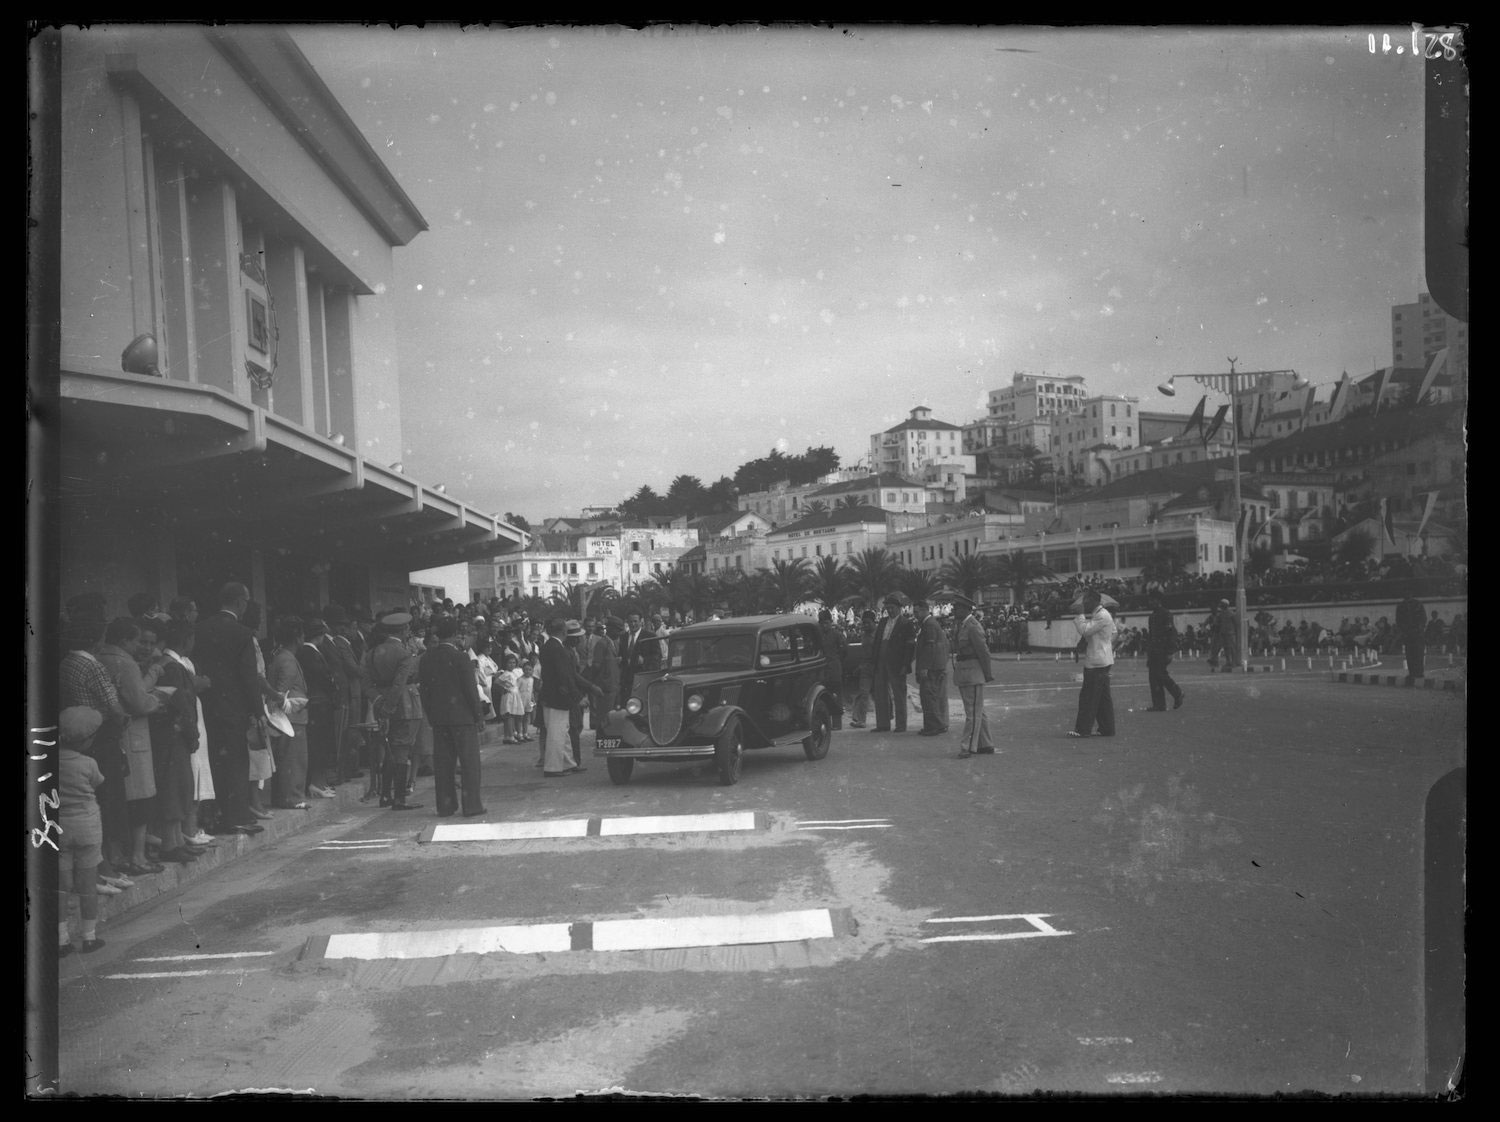 A large crowd stretched from the old railroad station down the boulevard (now Avenue Mohammad VI) in Tangier.